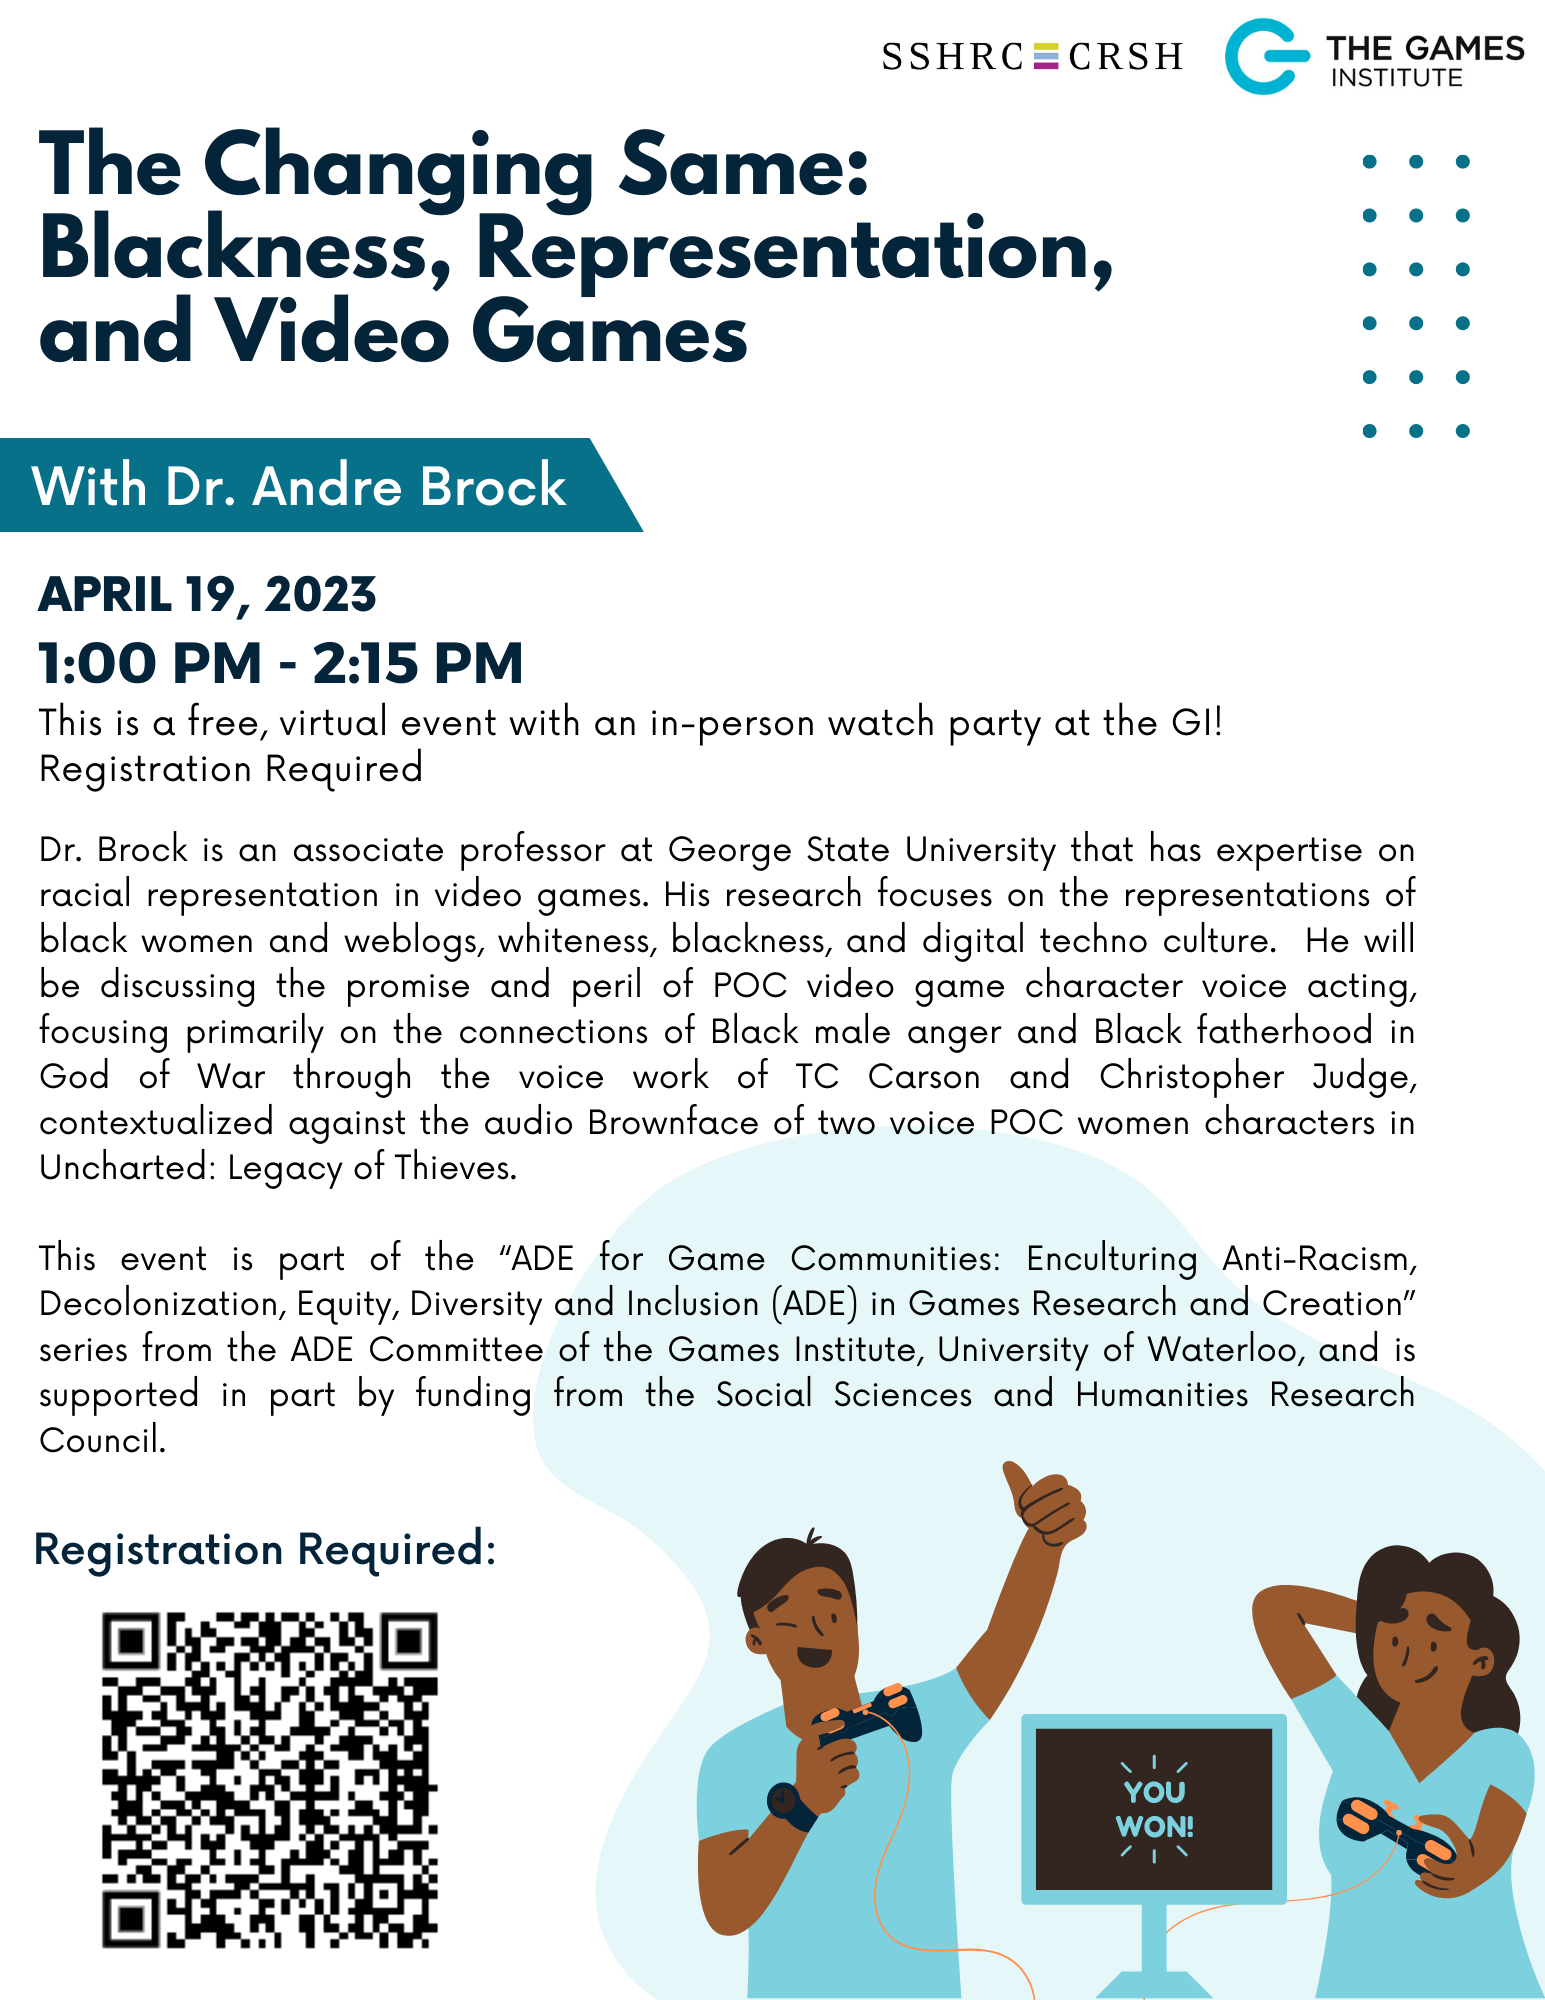 a promotional poster for "The Changing Same: Blackness, Representation, and Video Games